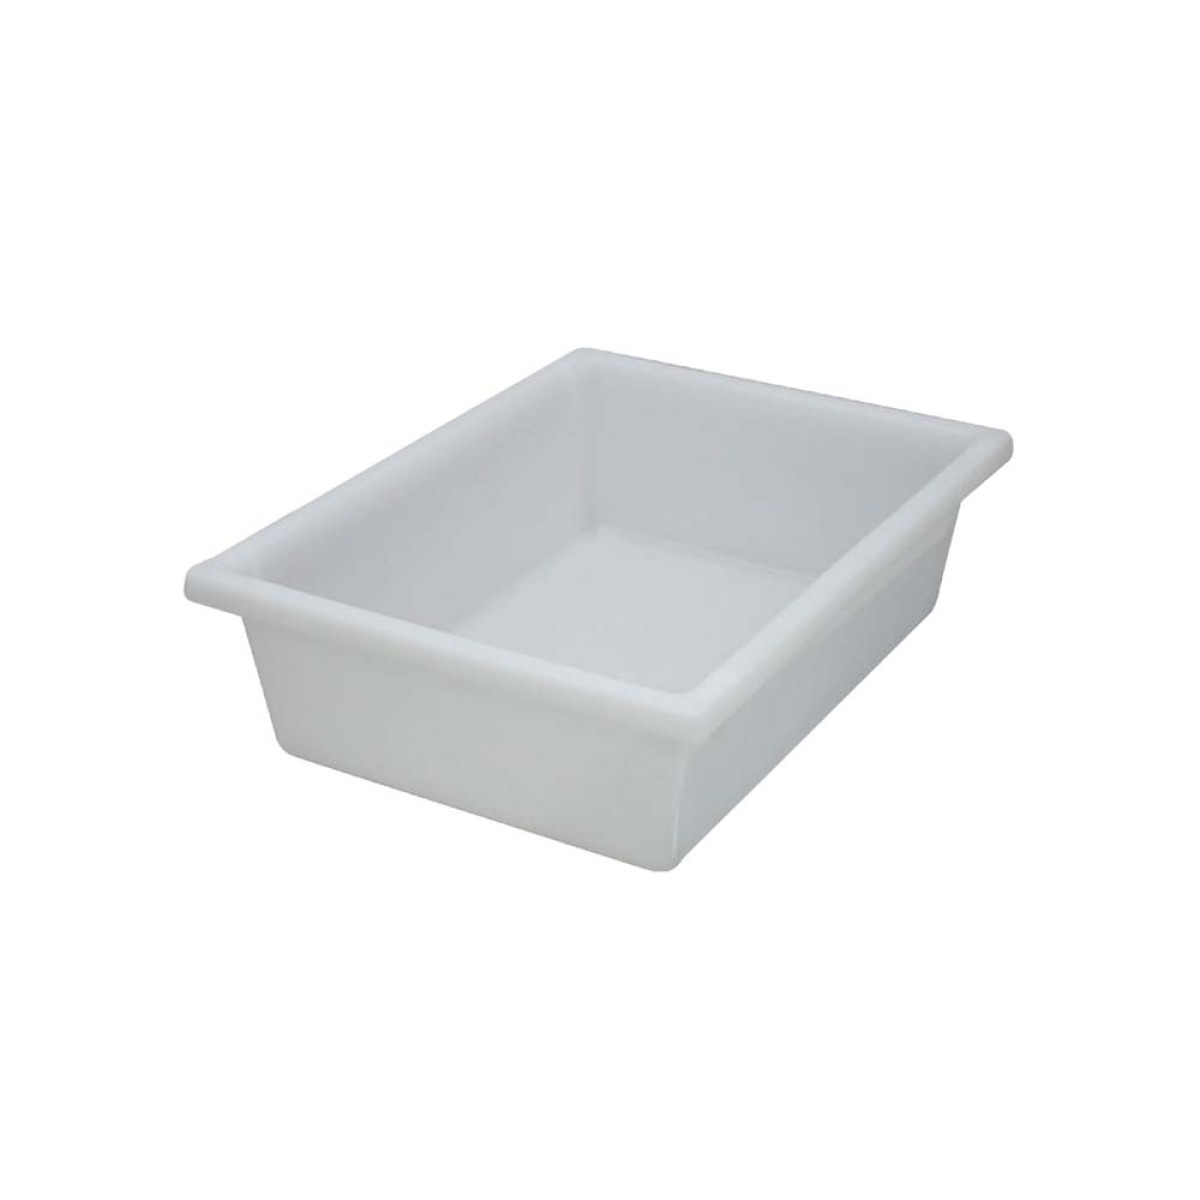 TRAY MULTISTAKA TOTE 13ltr WHITE No.4